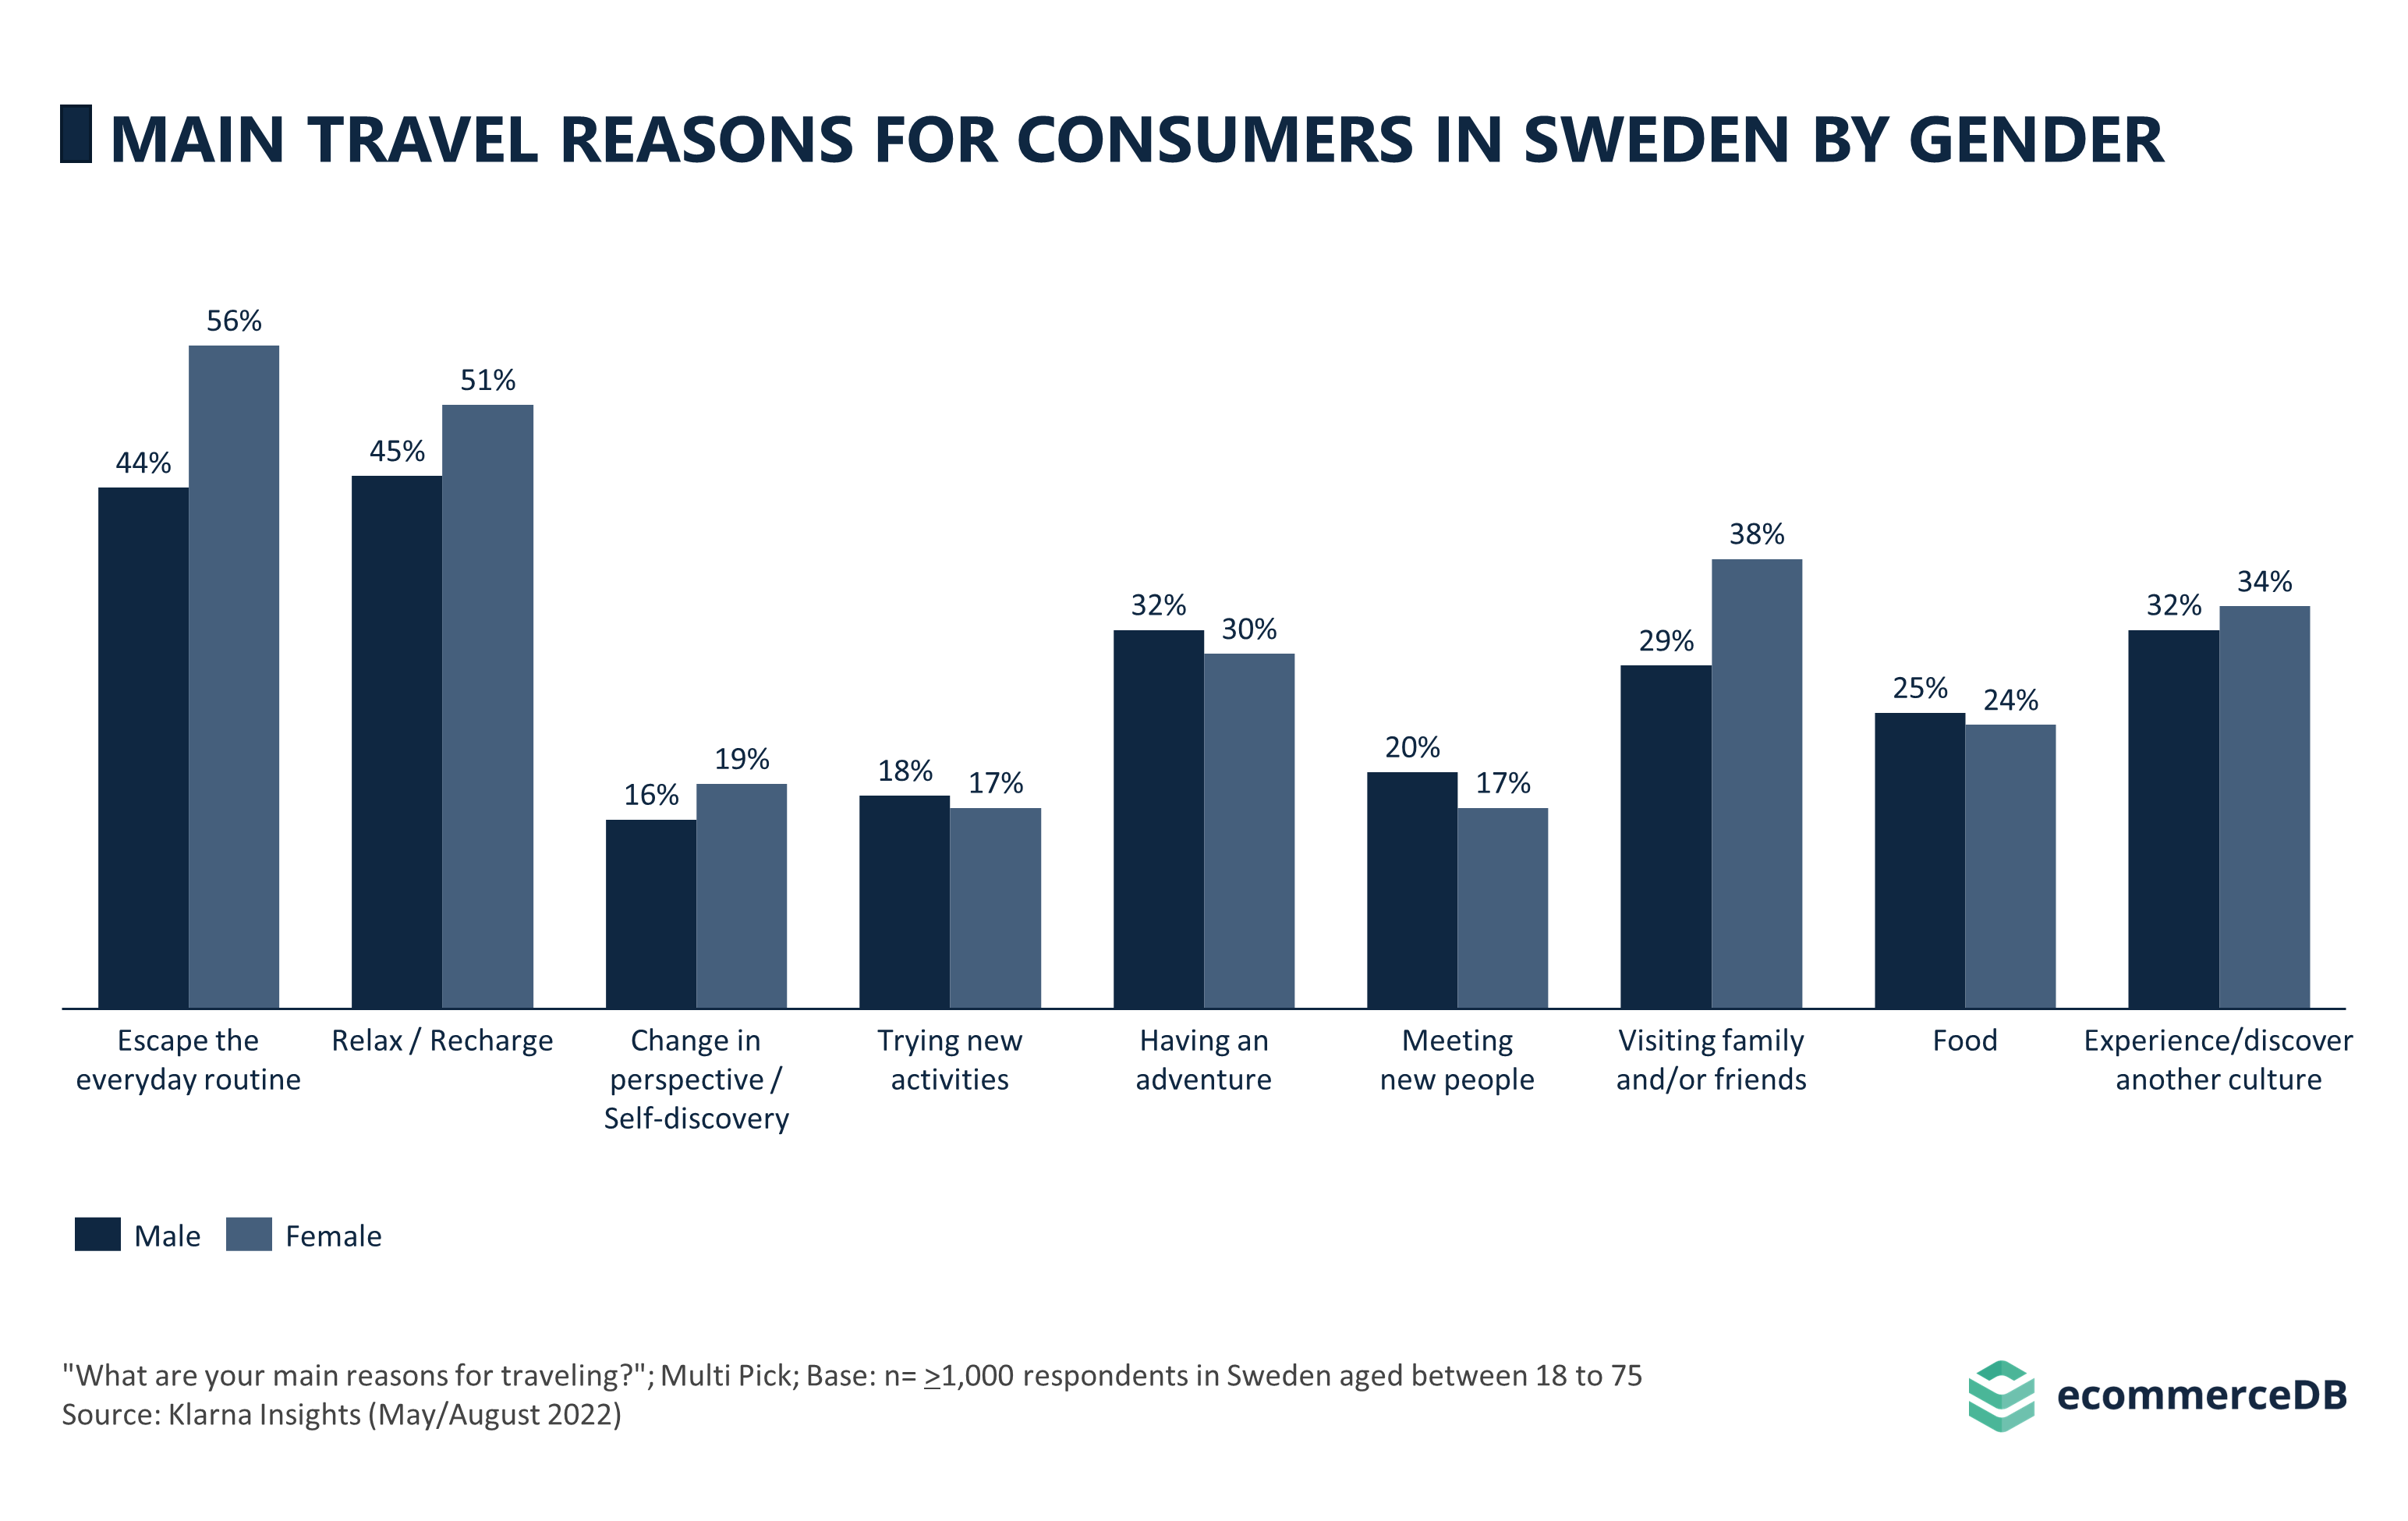 Main Travel Reasons for Consumers in Sweden by Gender